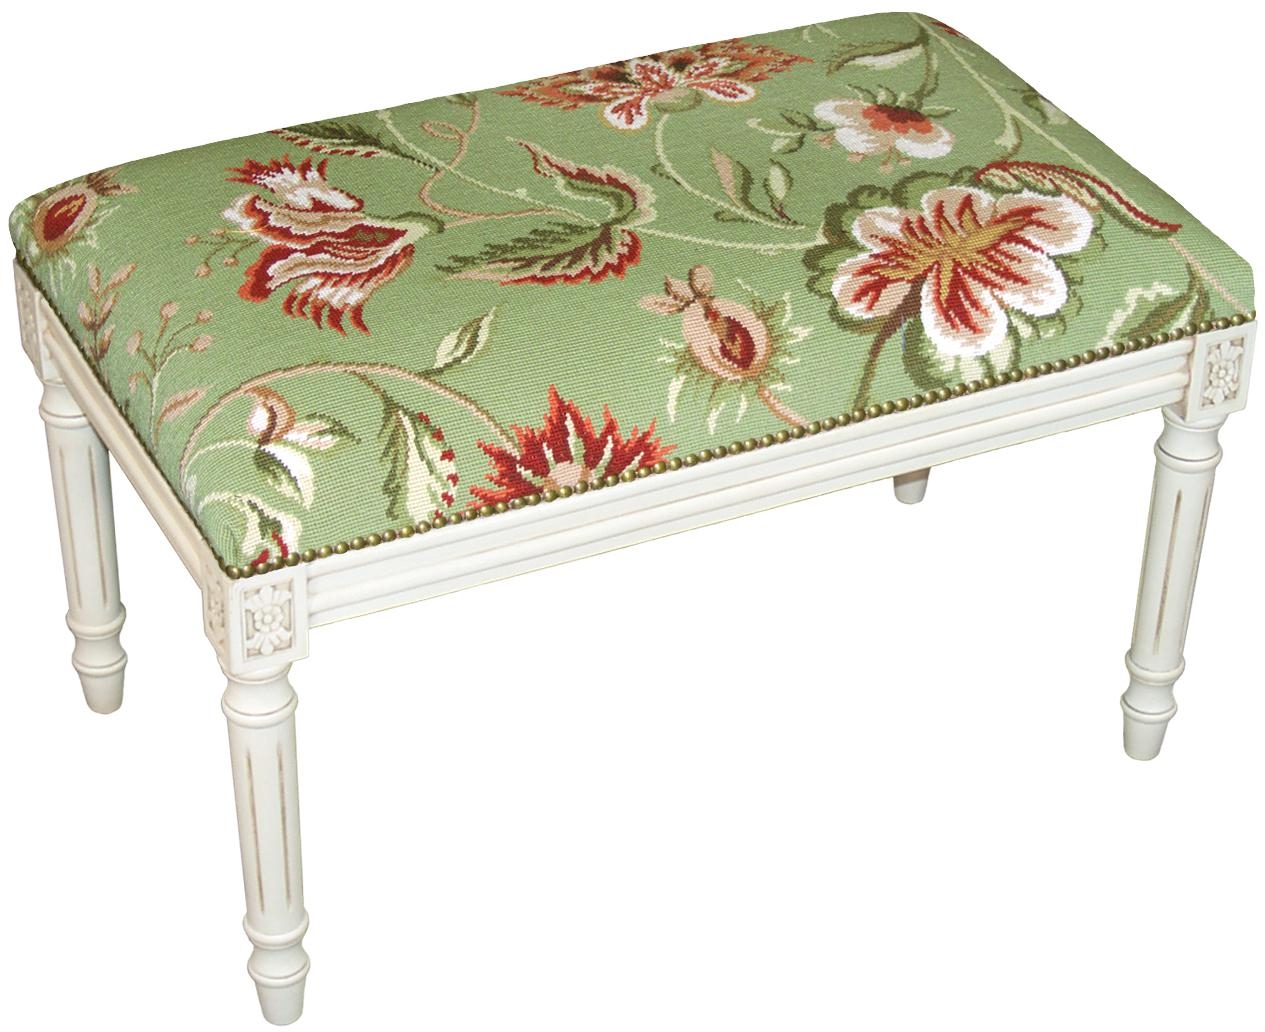 Bench Jacobean Floral Flowers Green Antique White Wash Antiqued Needlepoint-Image 2